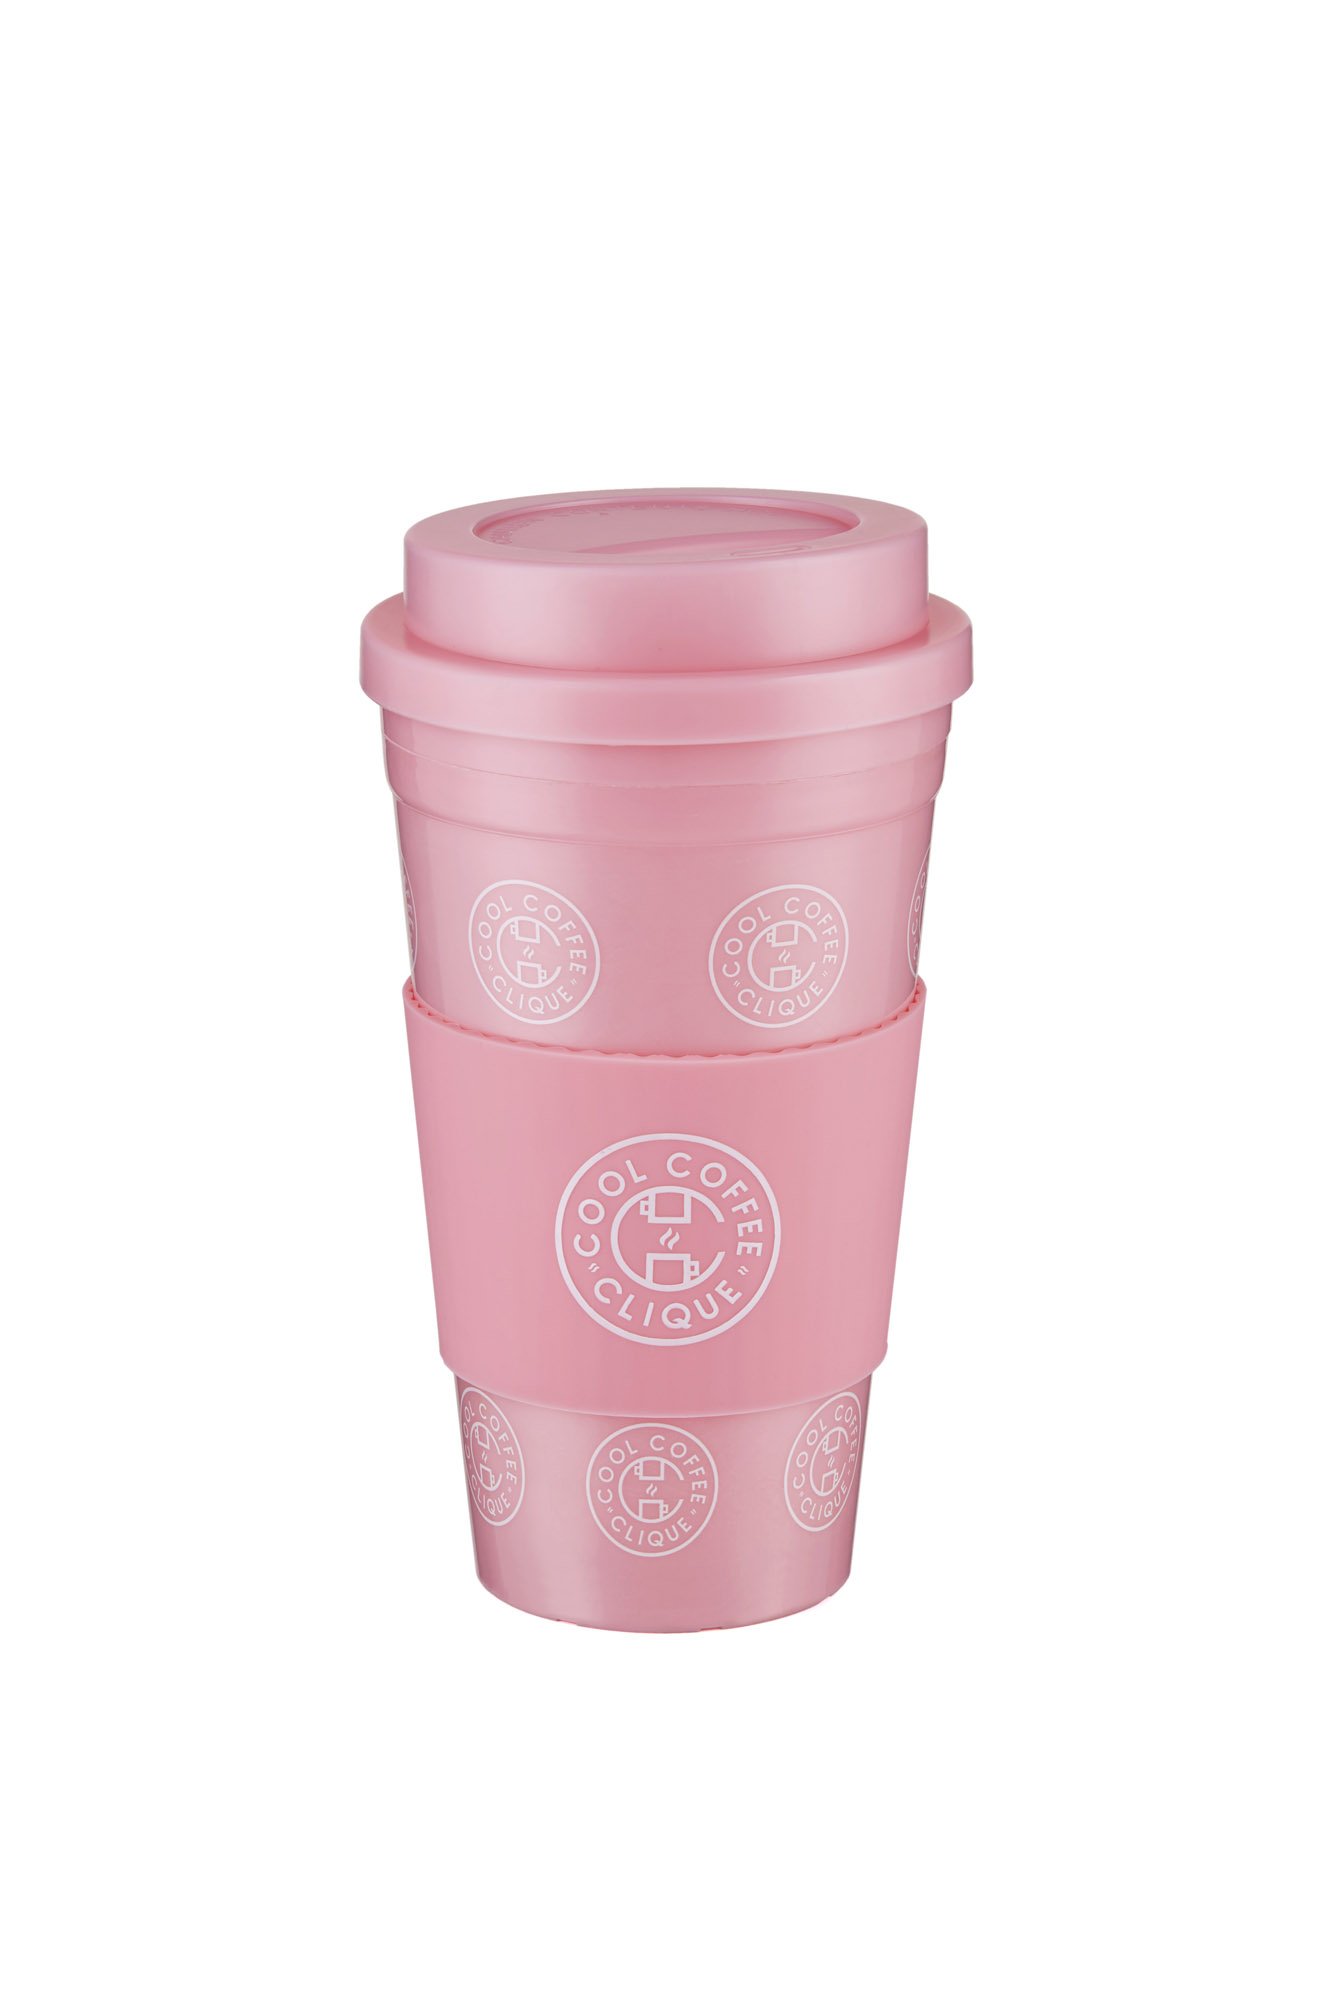 20201014_The_Coffee_Clique_Accessories_pink_cup.jpg